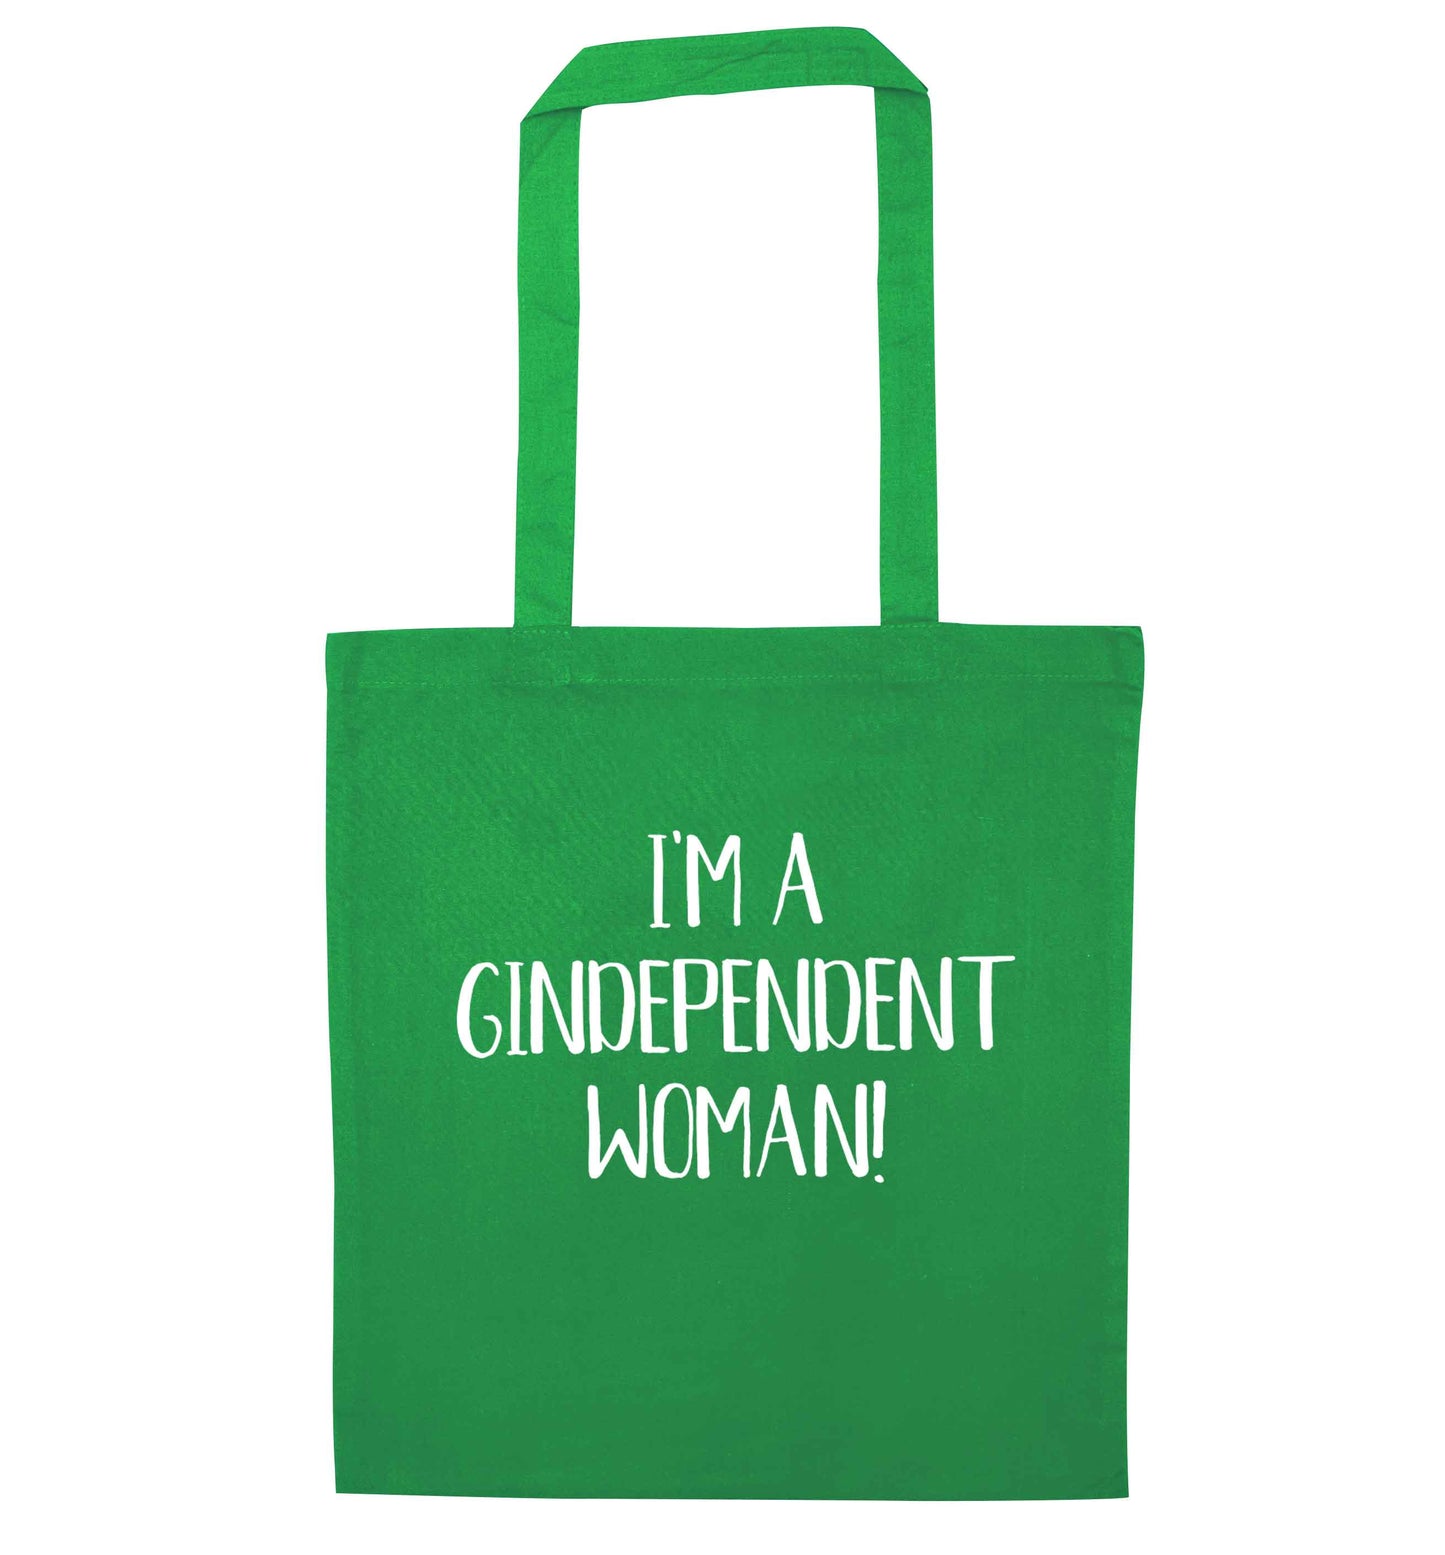 I'm a gindependent woman green tote bag